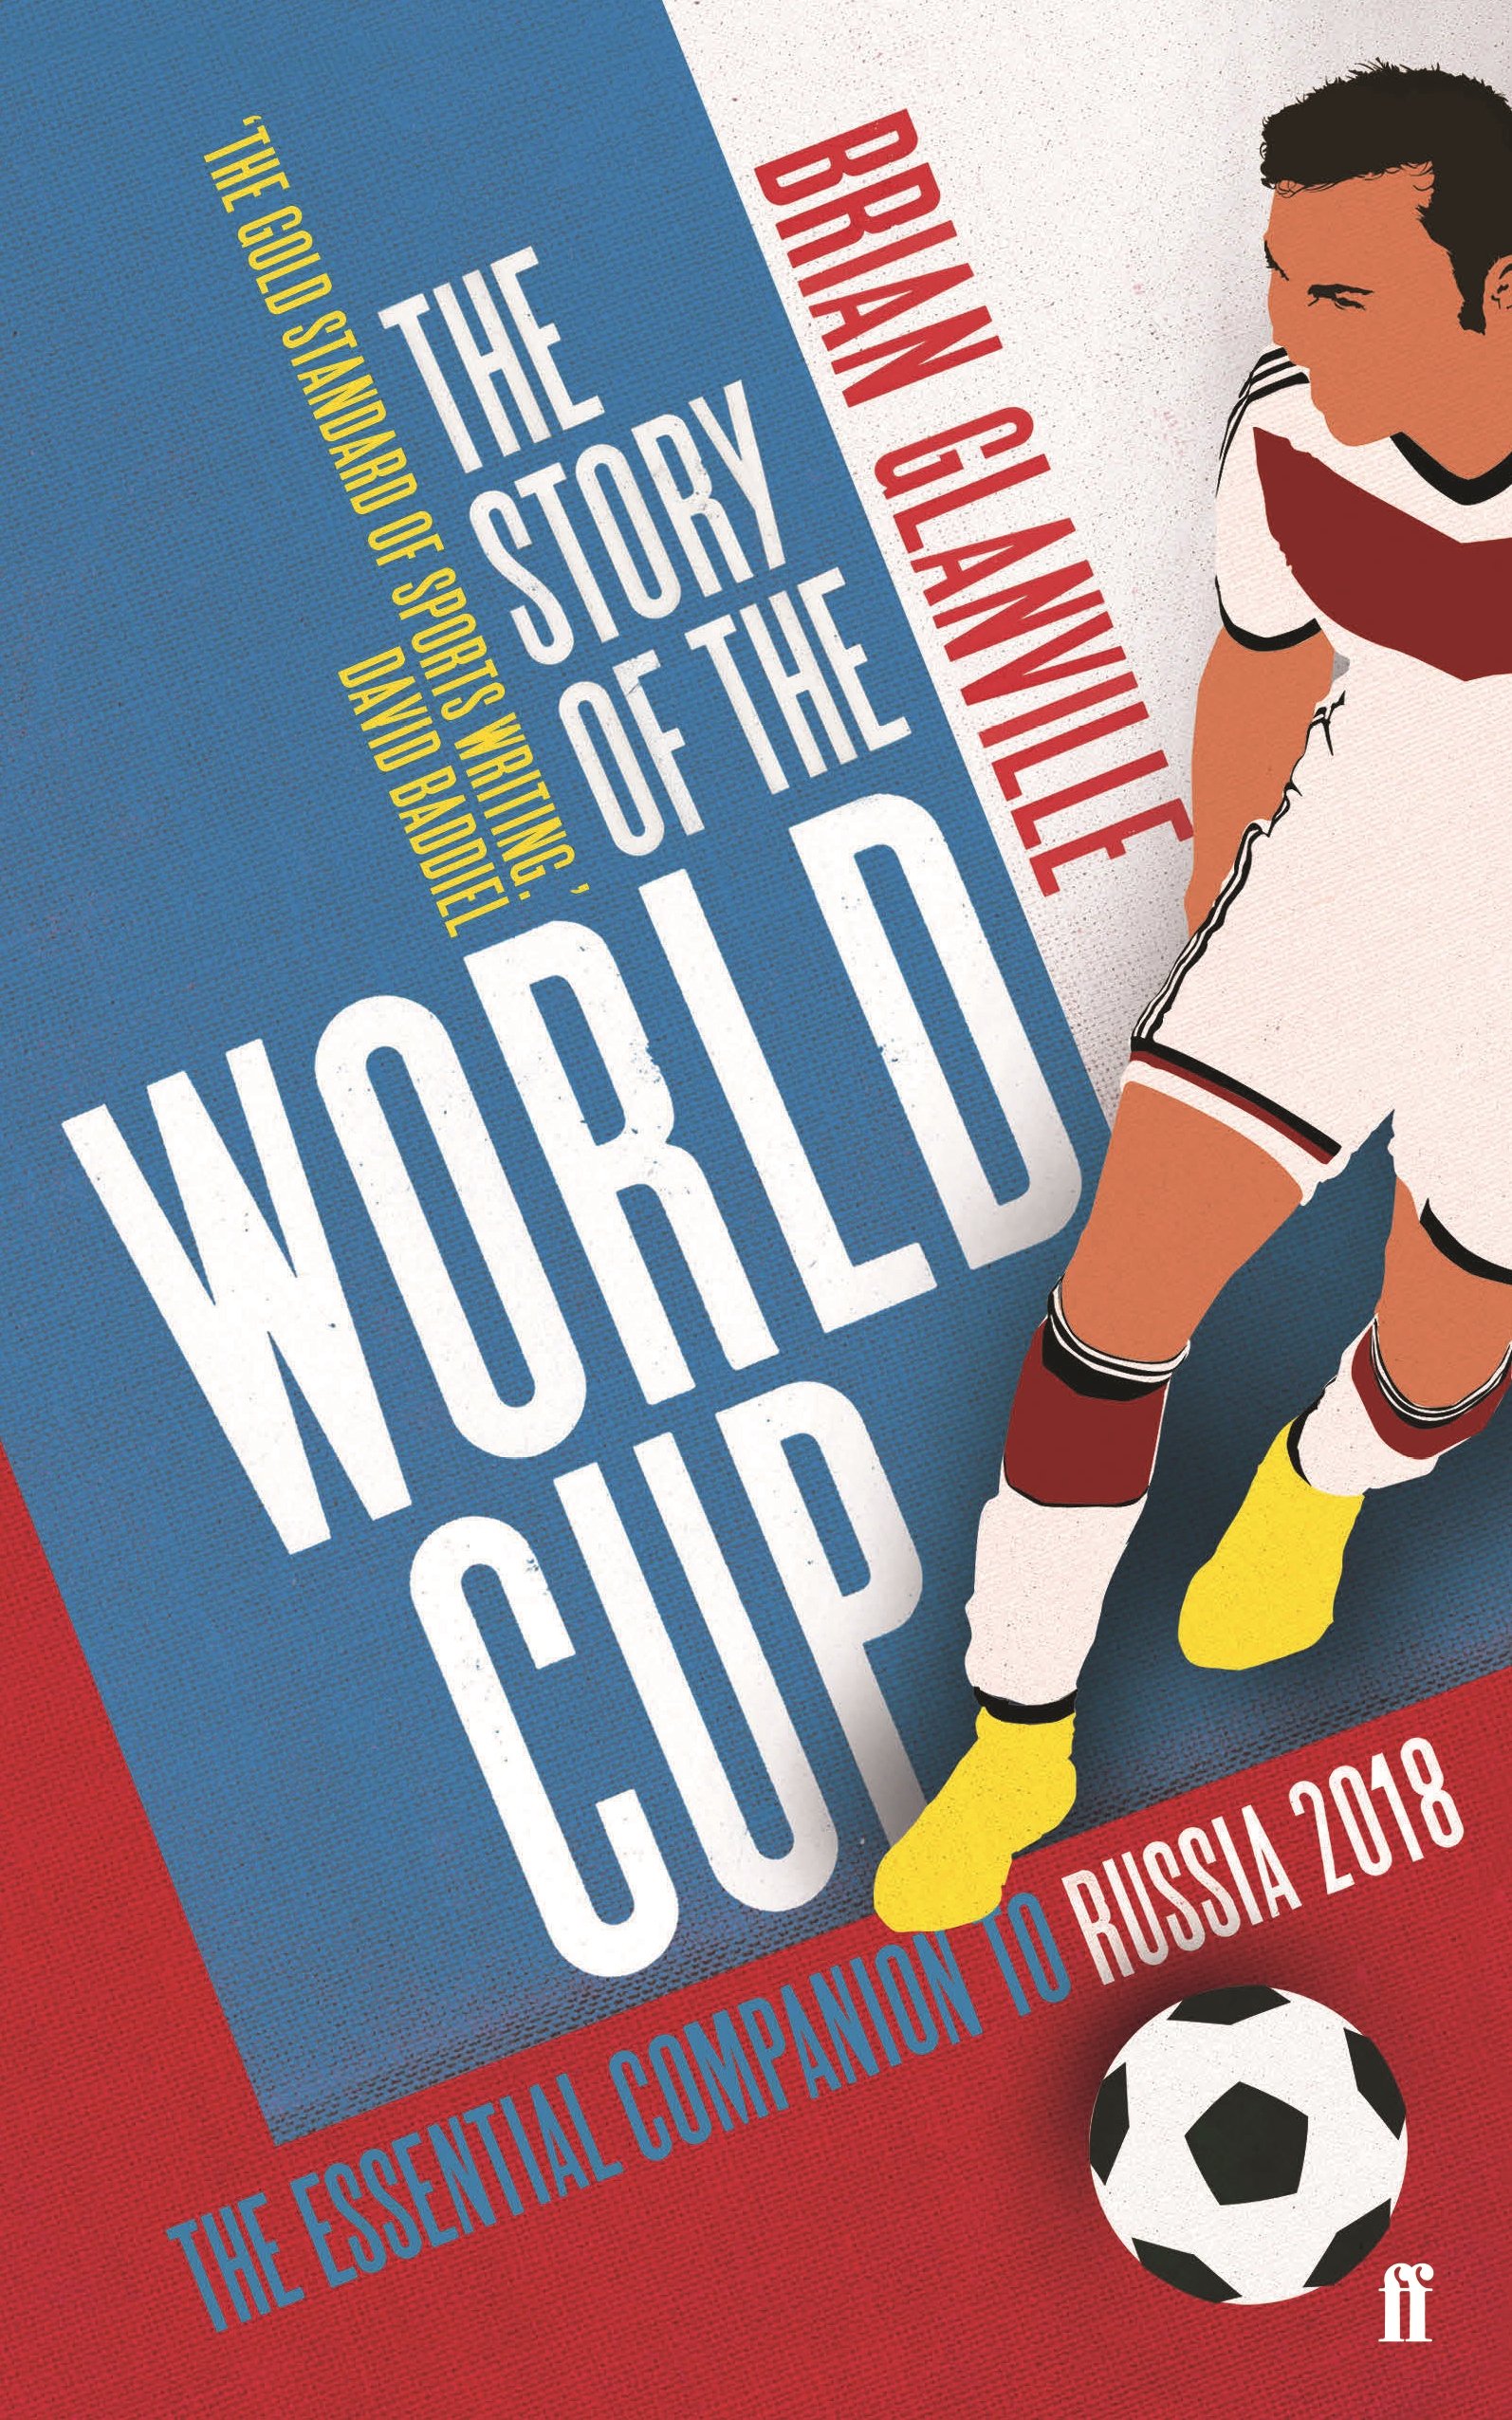 The Story of the World Cup: 2018 | Brian Glanville